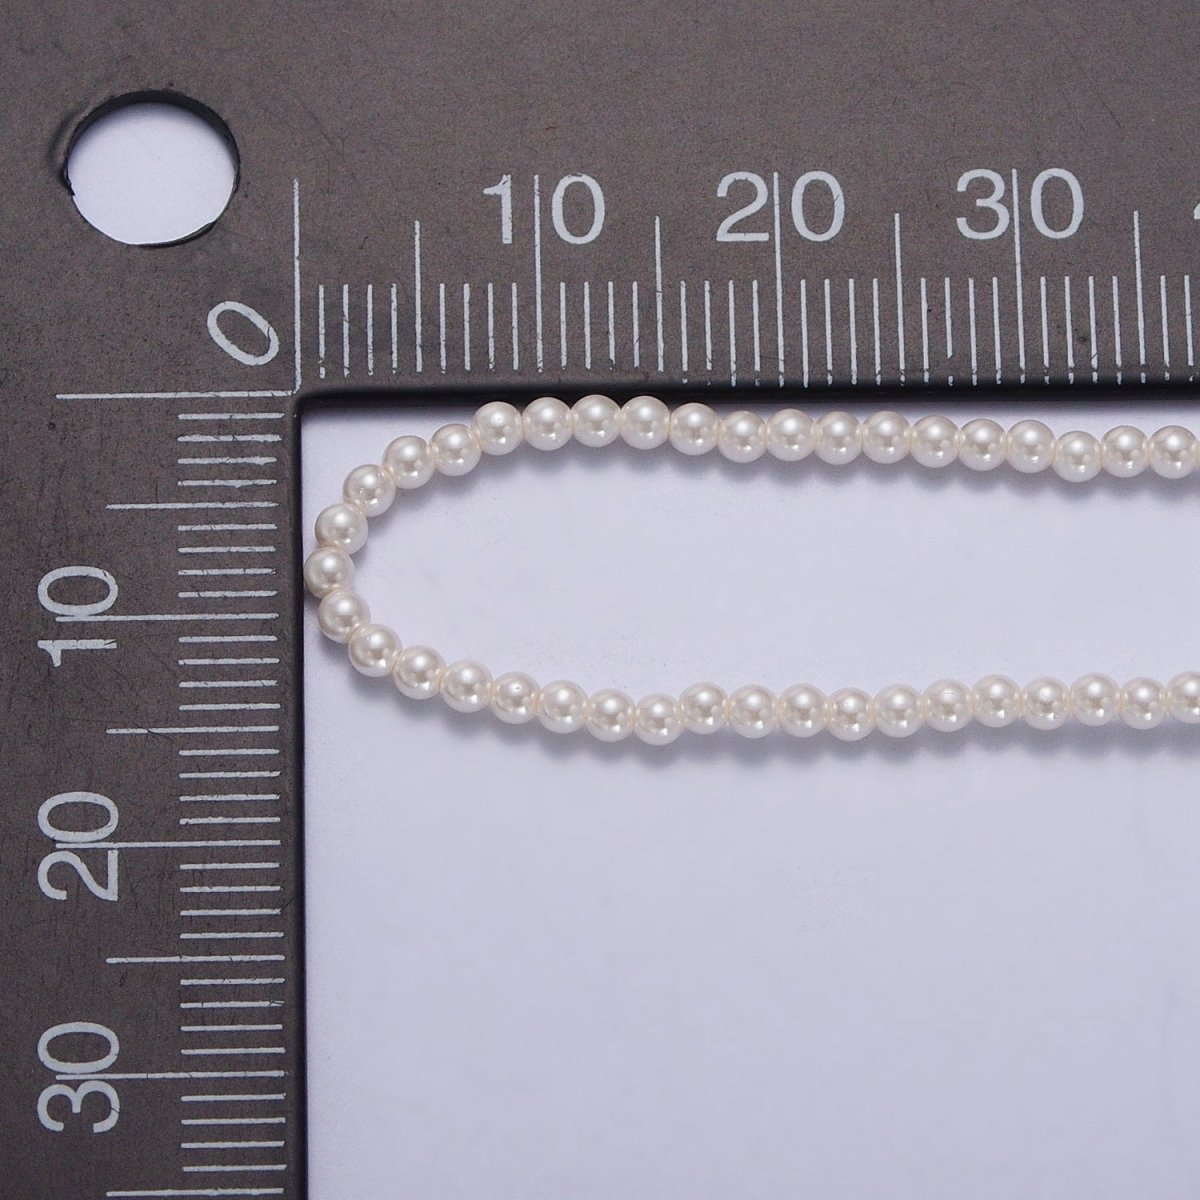 3mm Tiny Pearl Necklace for Women Shell Water Pearl Necklace Handmade White Small Round Pearl Jewelry | WA-1559 Clearance Pricing - DLUXCA